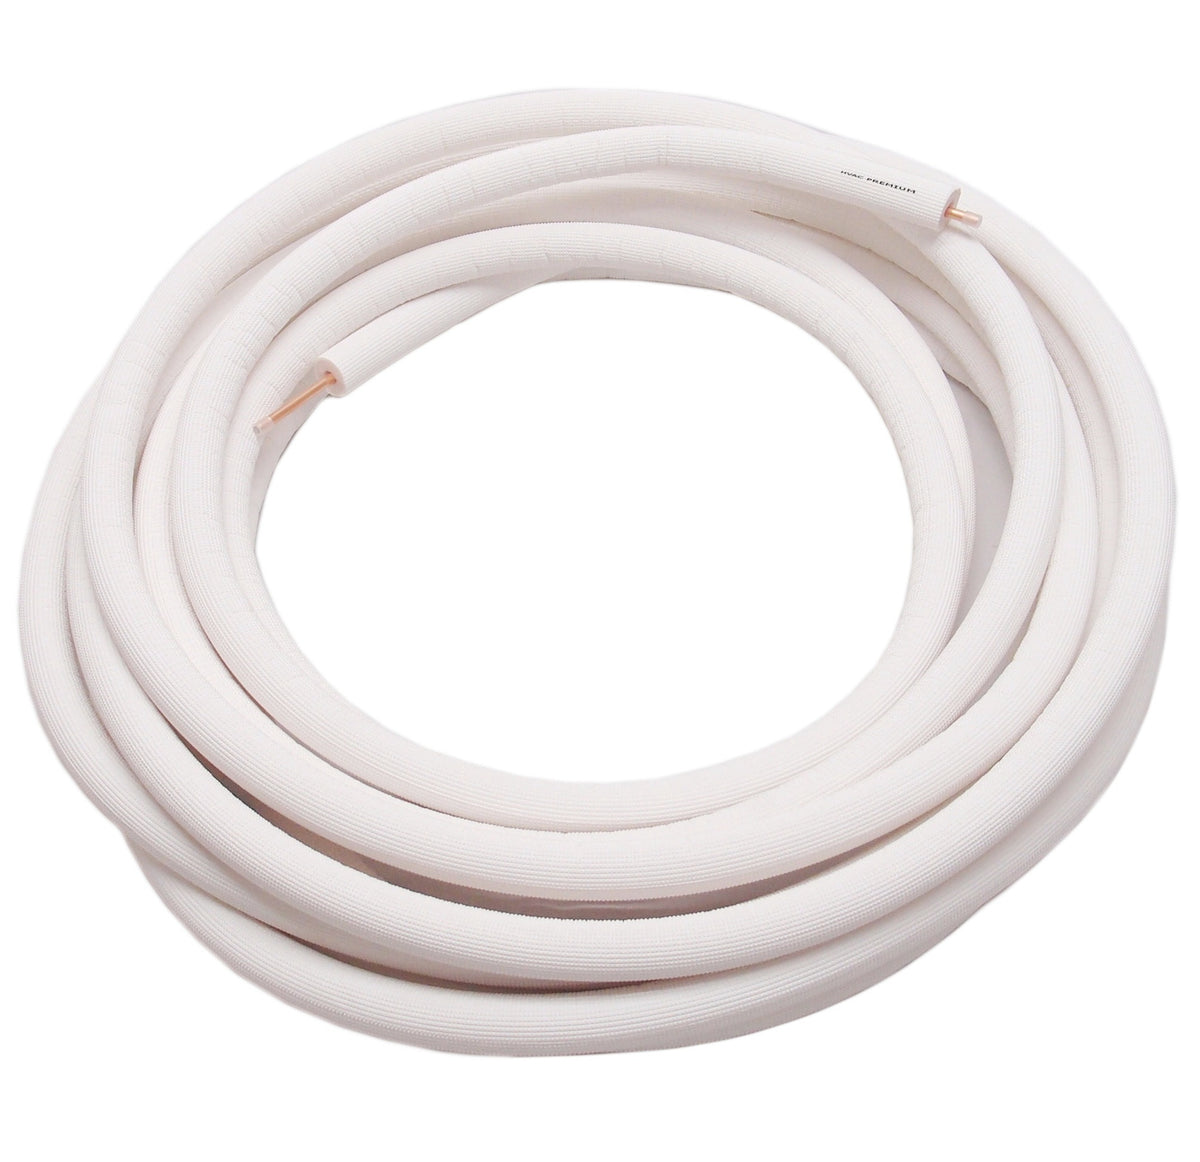 3/8&quot; Insulated Copper Coil Line - Seamless Pipe Tube for HVAC, Refrigerant - 1/2&quot; White Insulation - 164&#39; Long